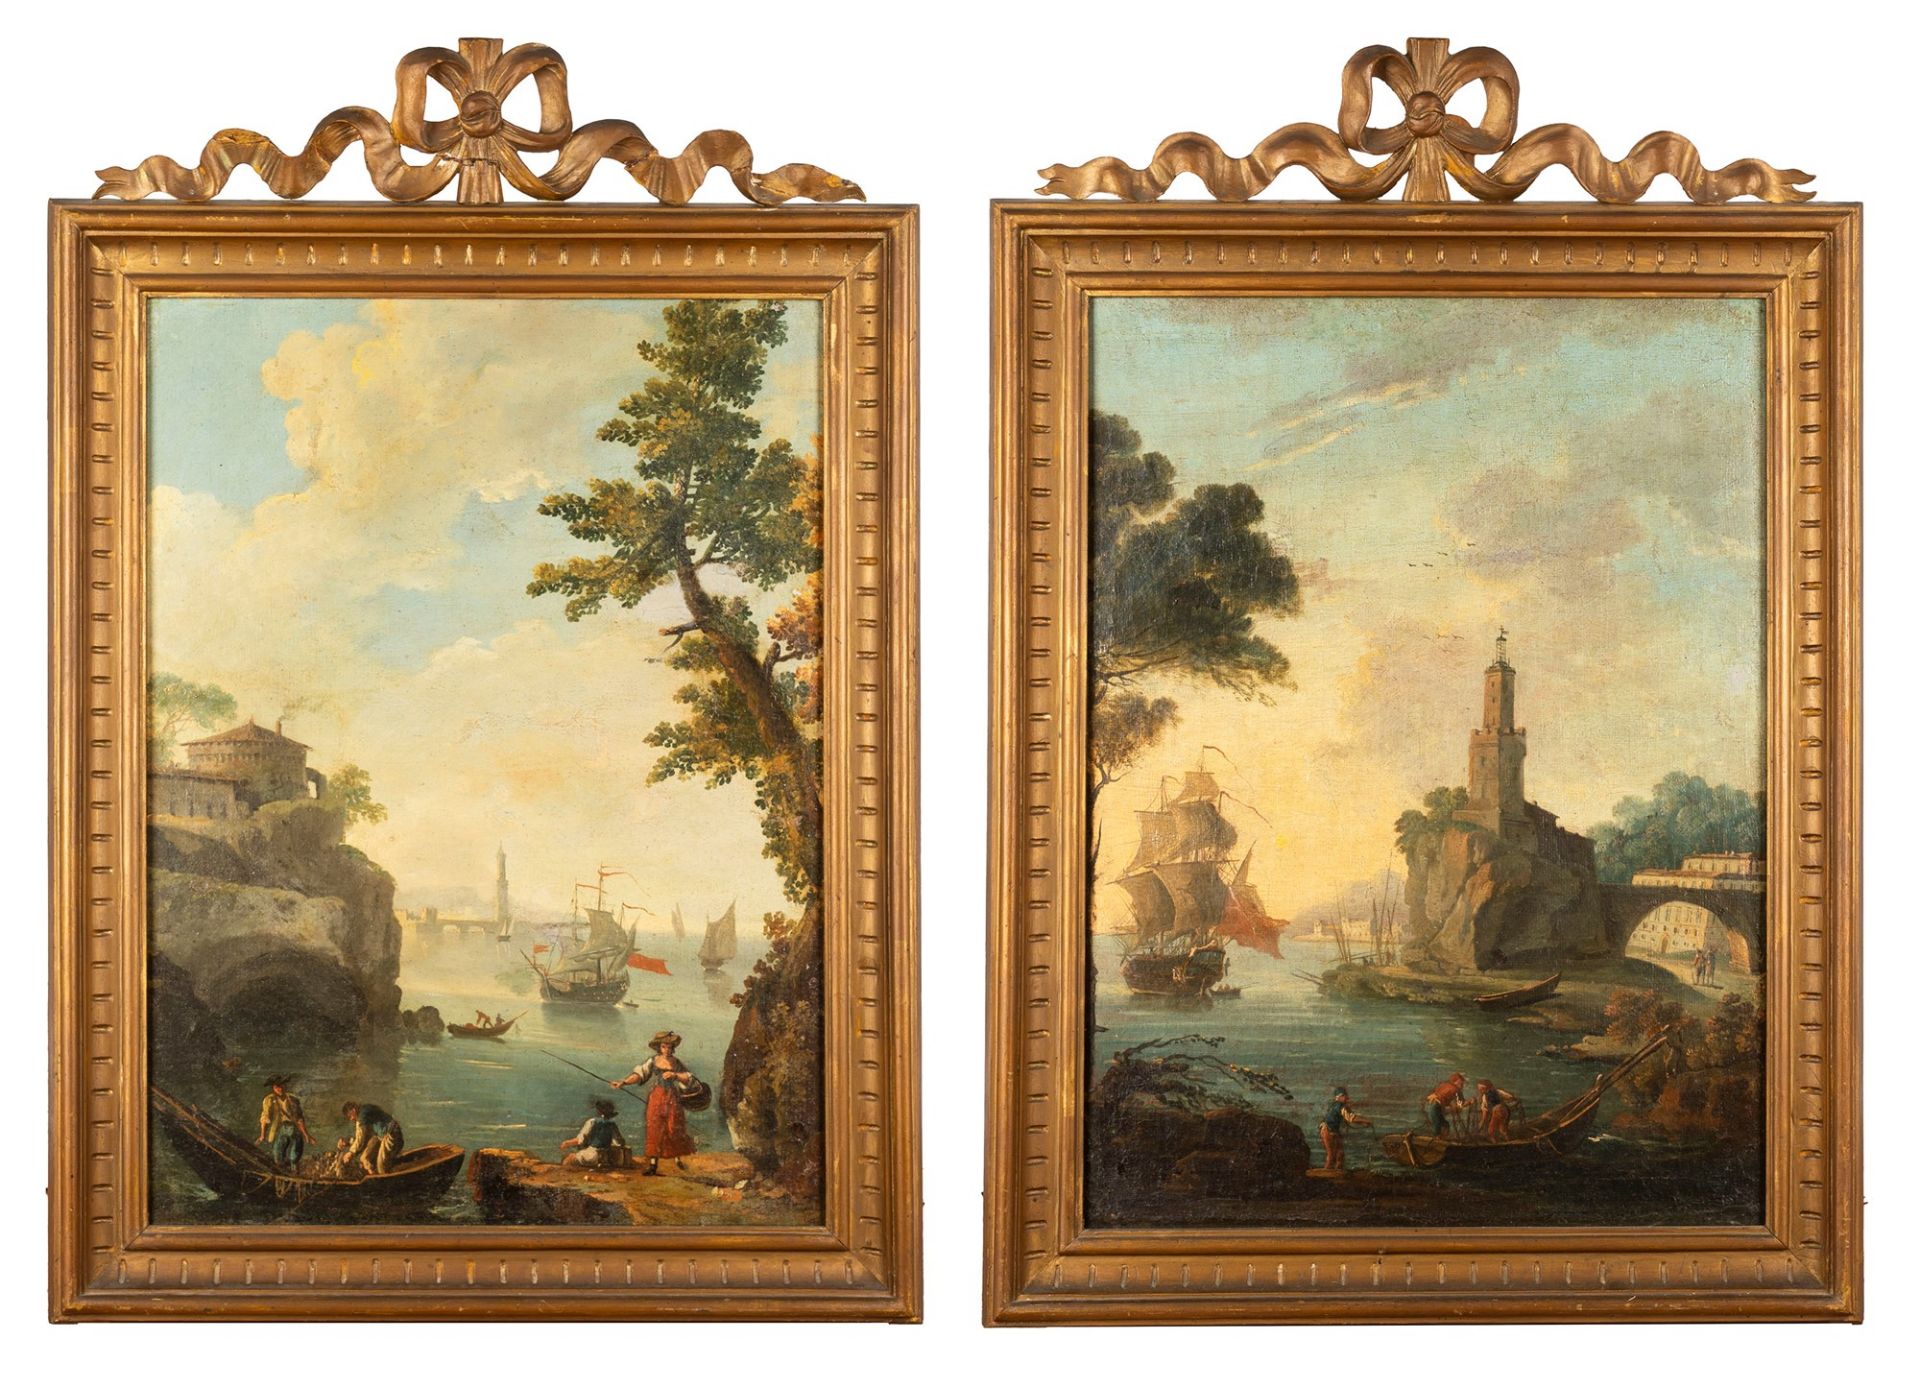 Italian school, eighteenth century - Two coastal landscapes with fishermen and sailing ships